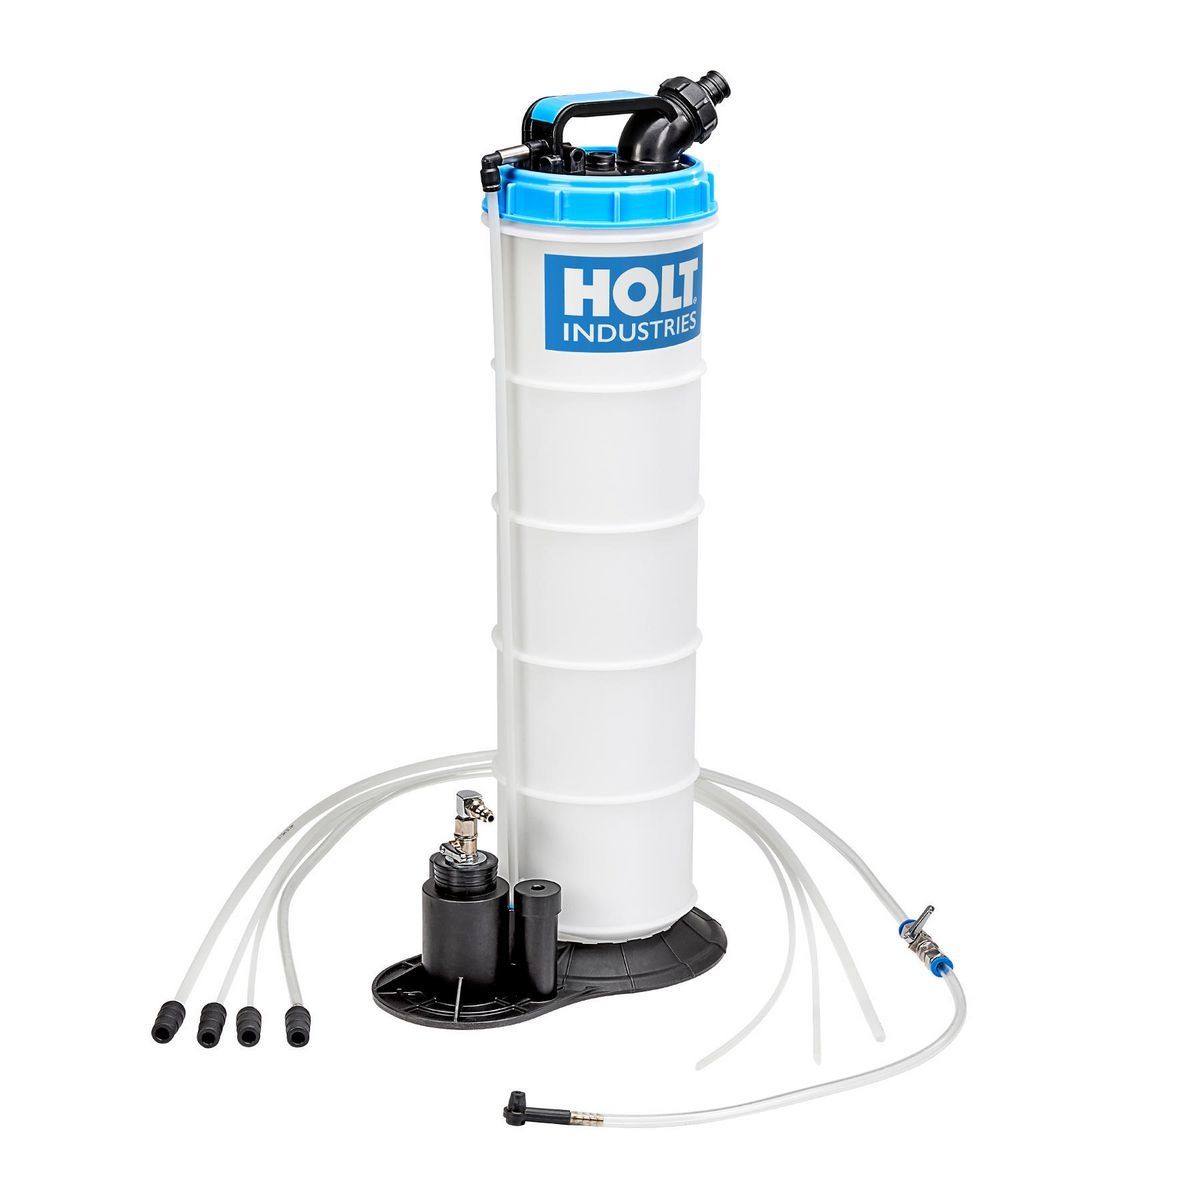 HOLT INDUSTRIES Pneumatic Air Operated Fluid Extractor